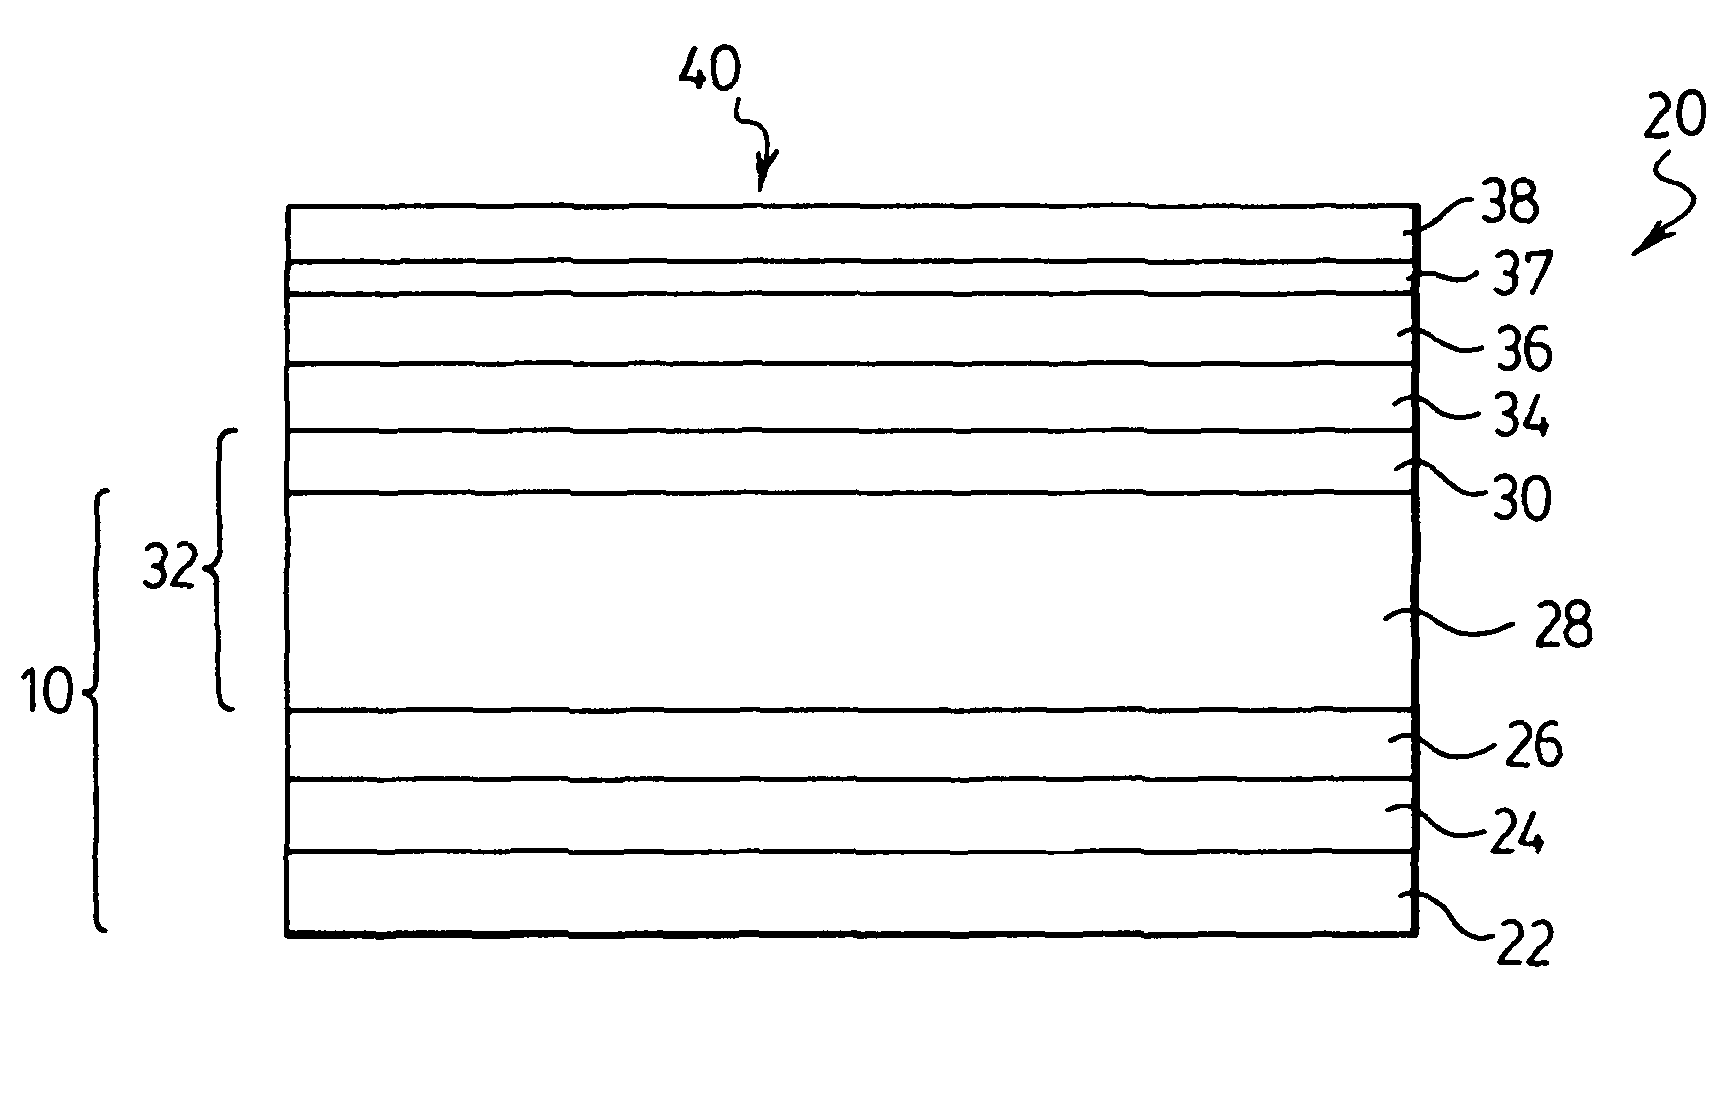 Barrier layer for thick film dielectric electroluminescent displays